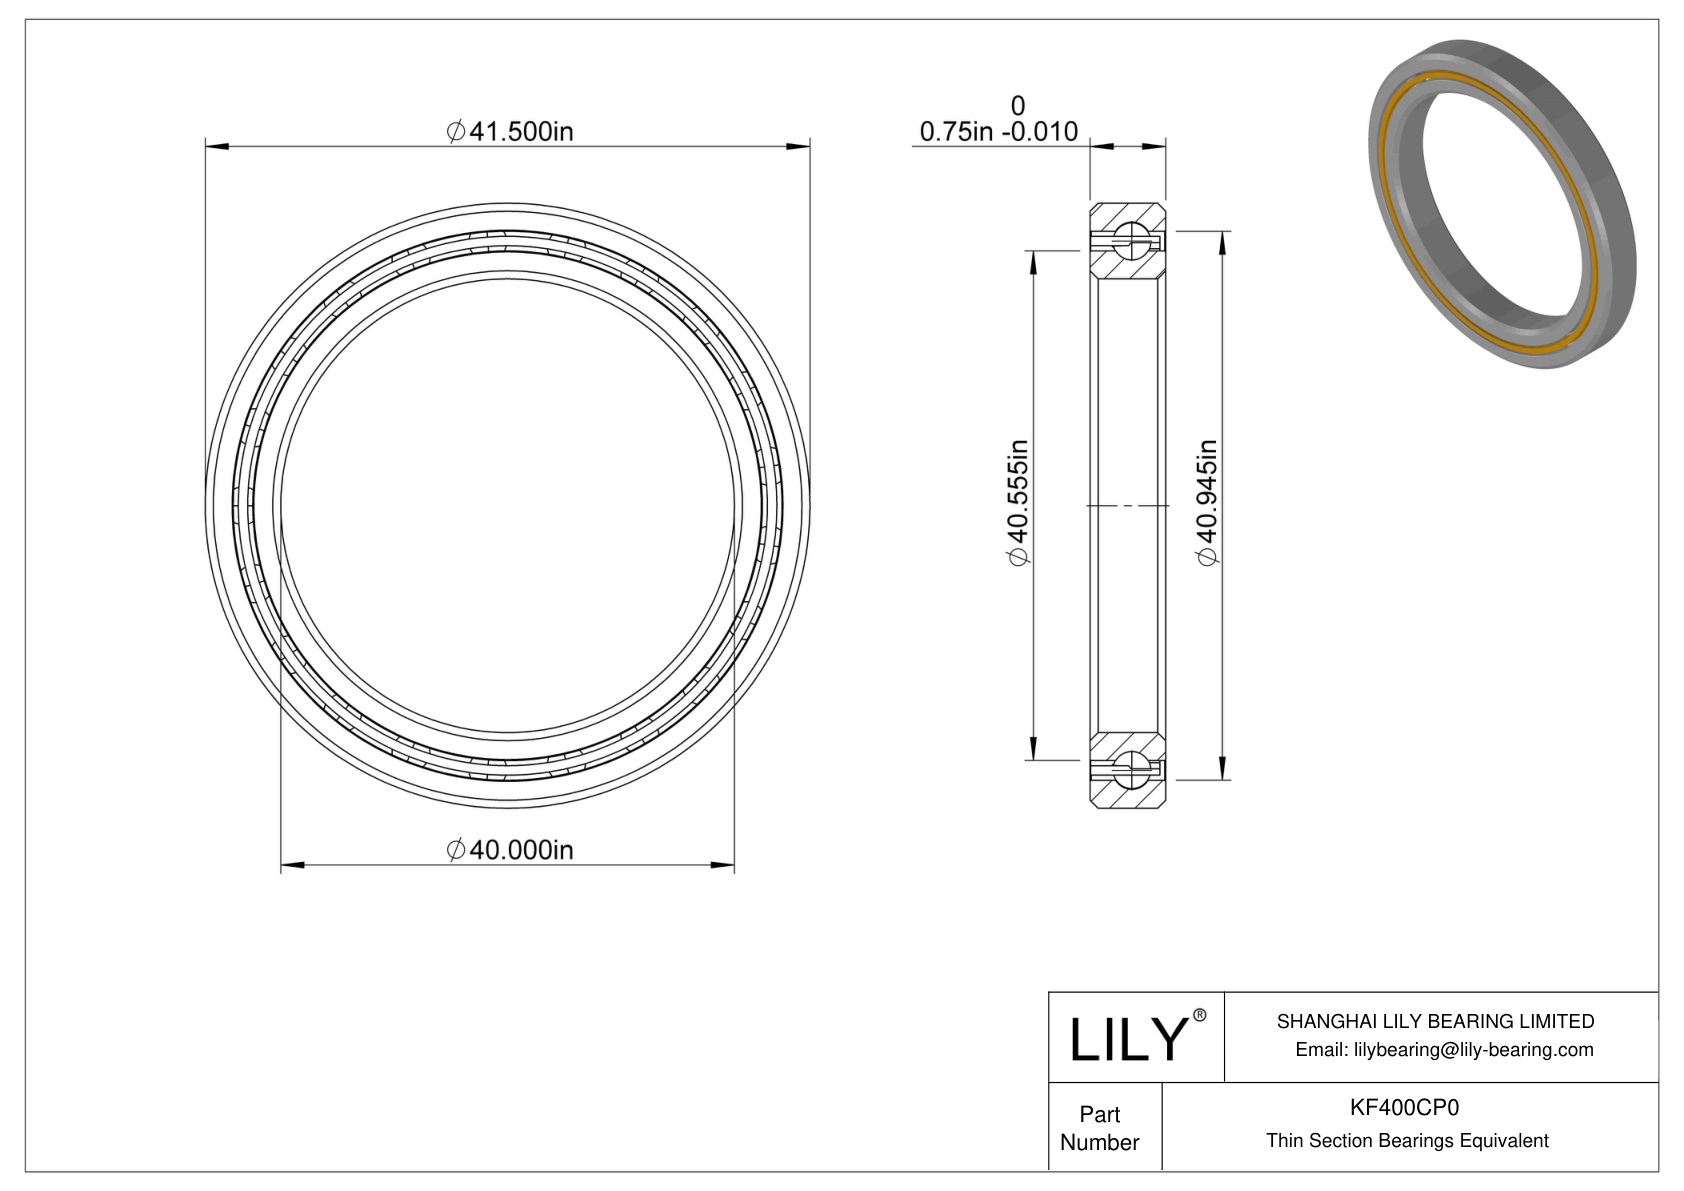 KF400CP0 Constant Section (CS) Bearings cad drawing